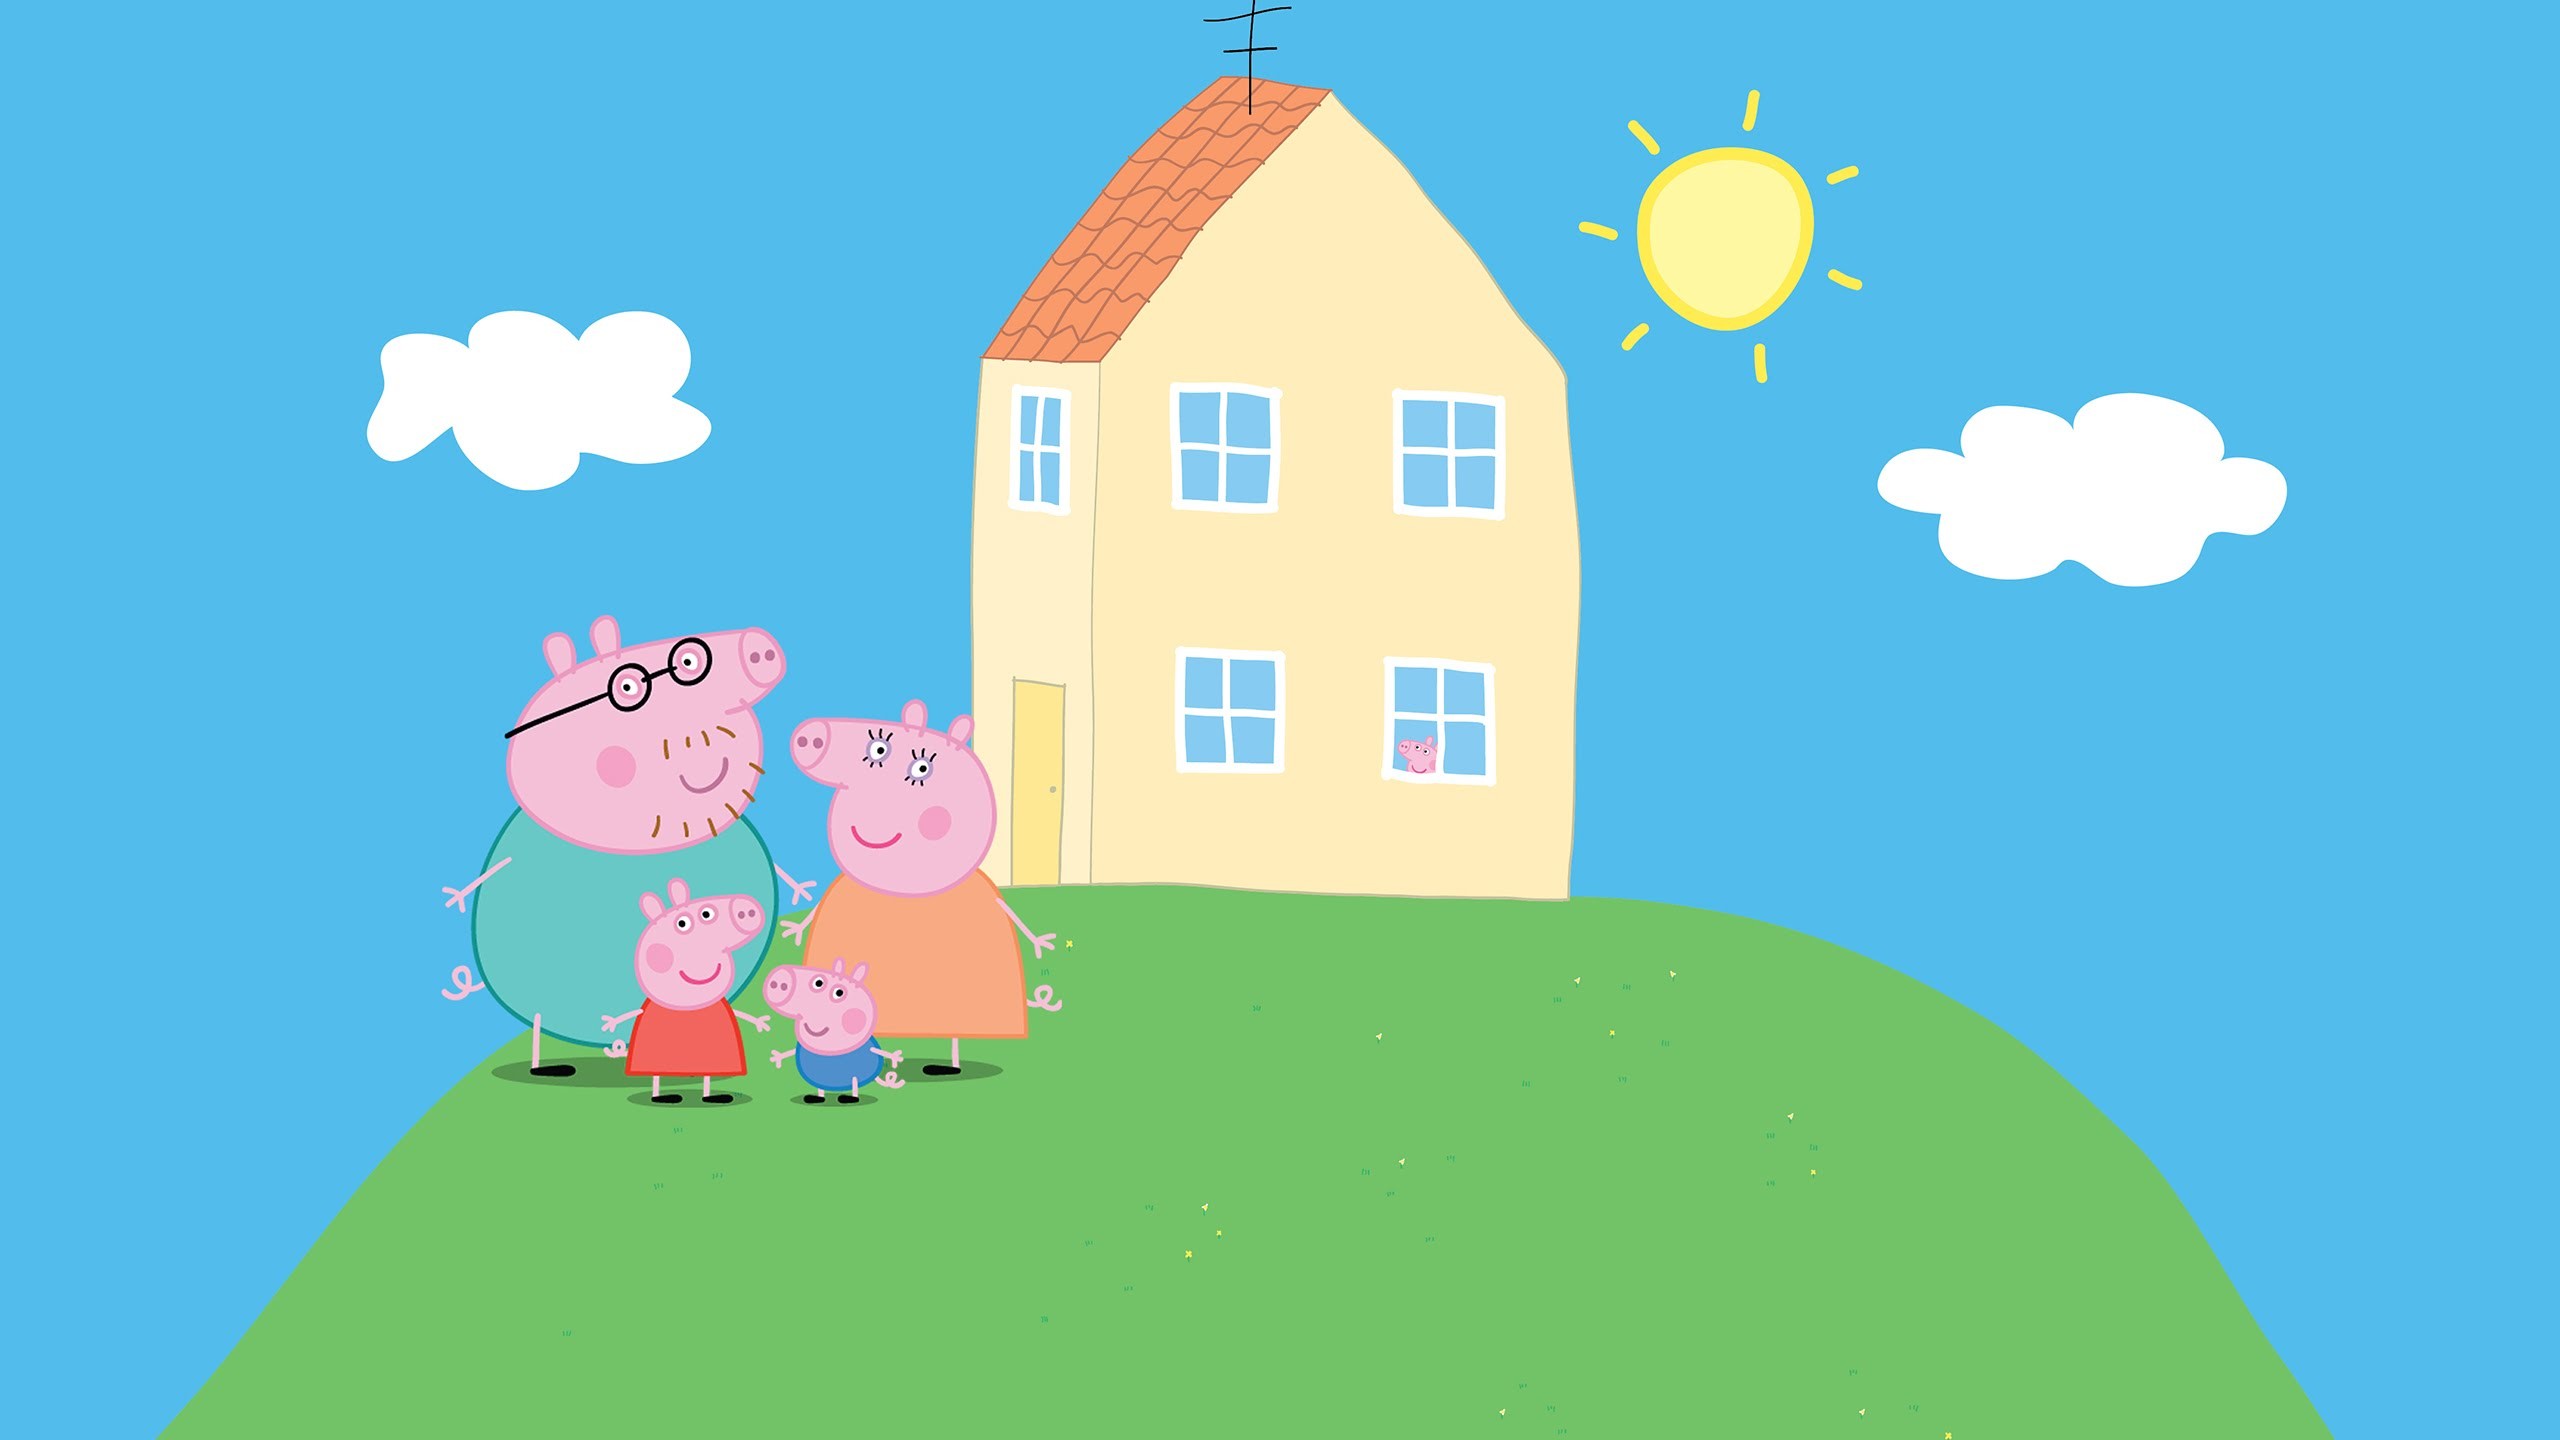 Peppa Pig Wallpaper - Peppa Pig Family And House , HD Wallpaper & Backgrounds